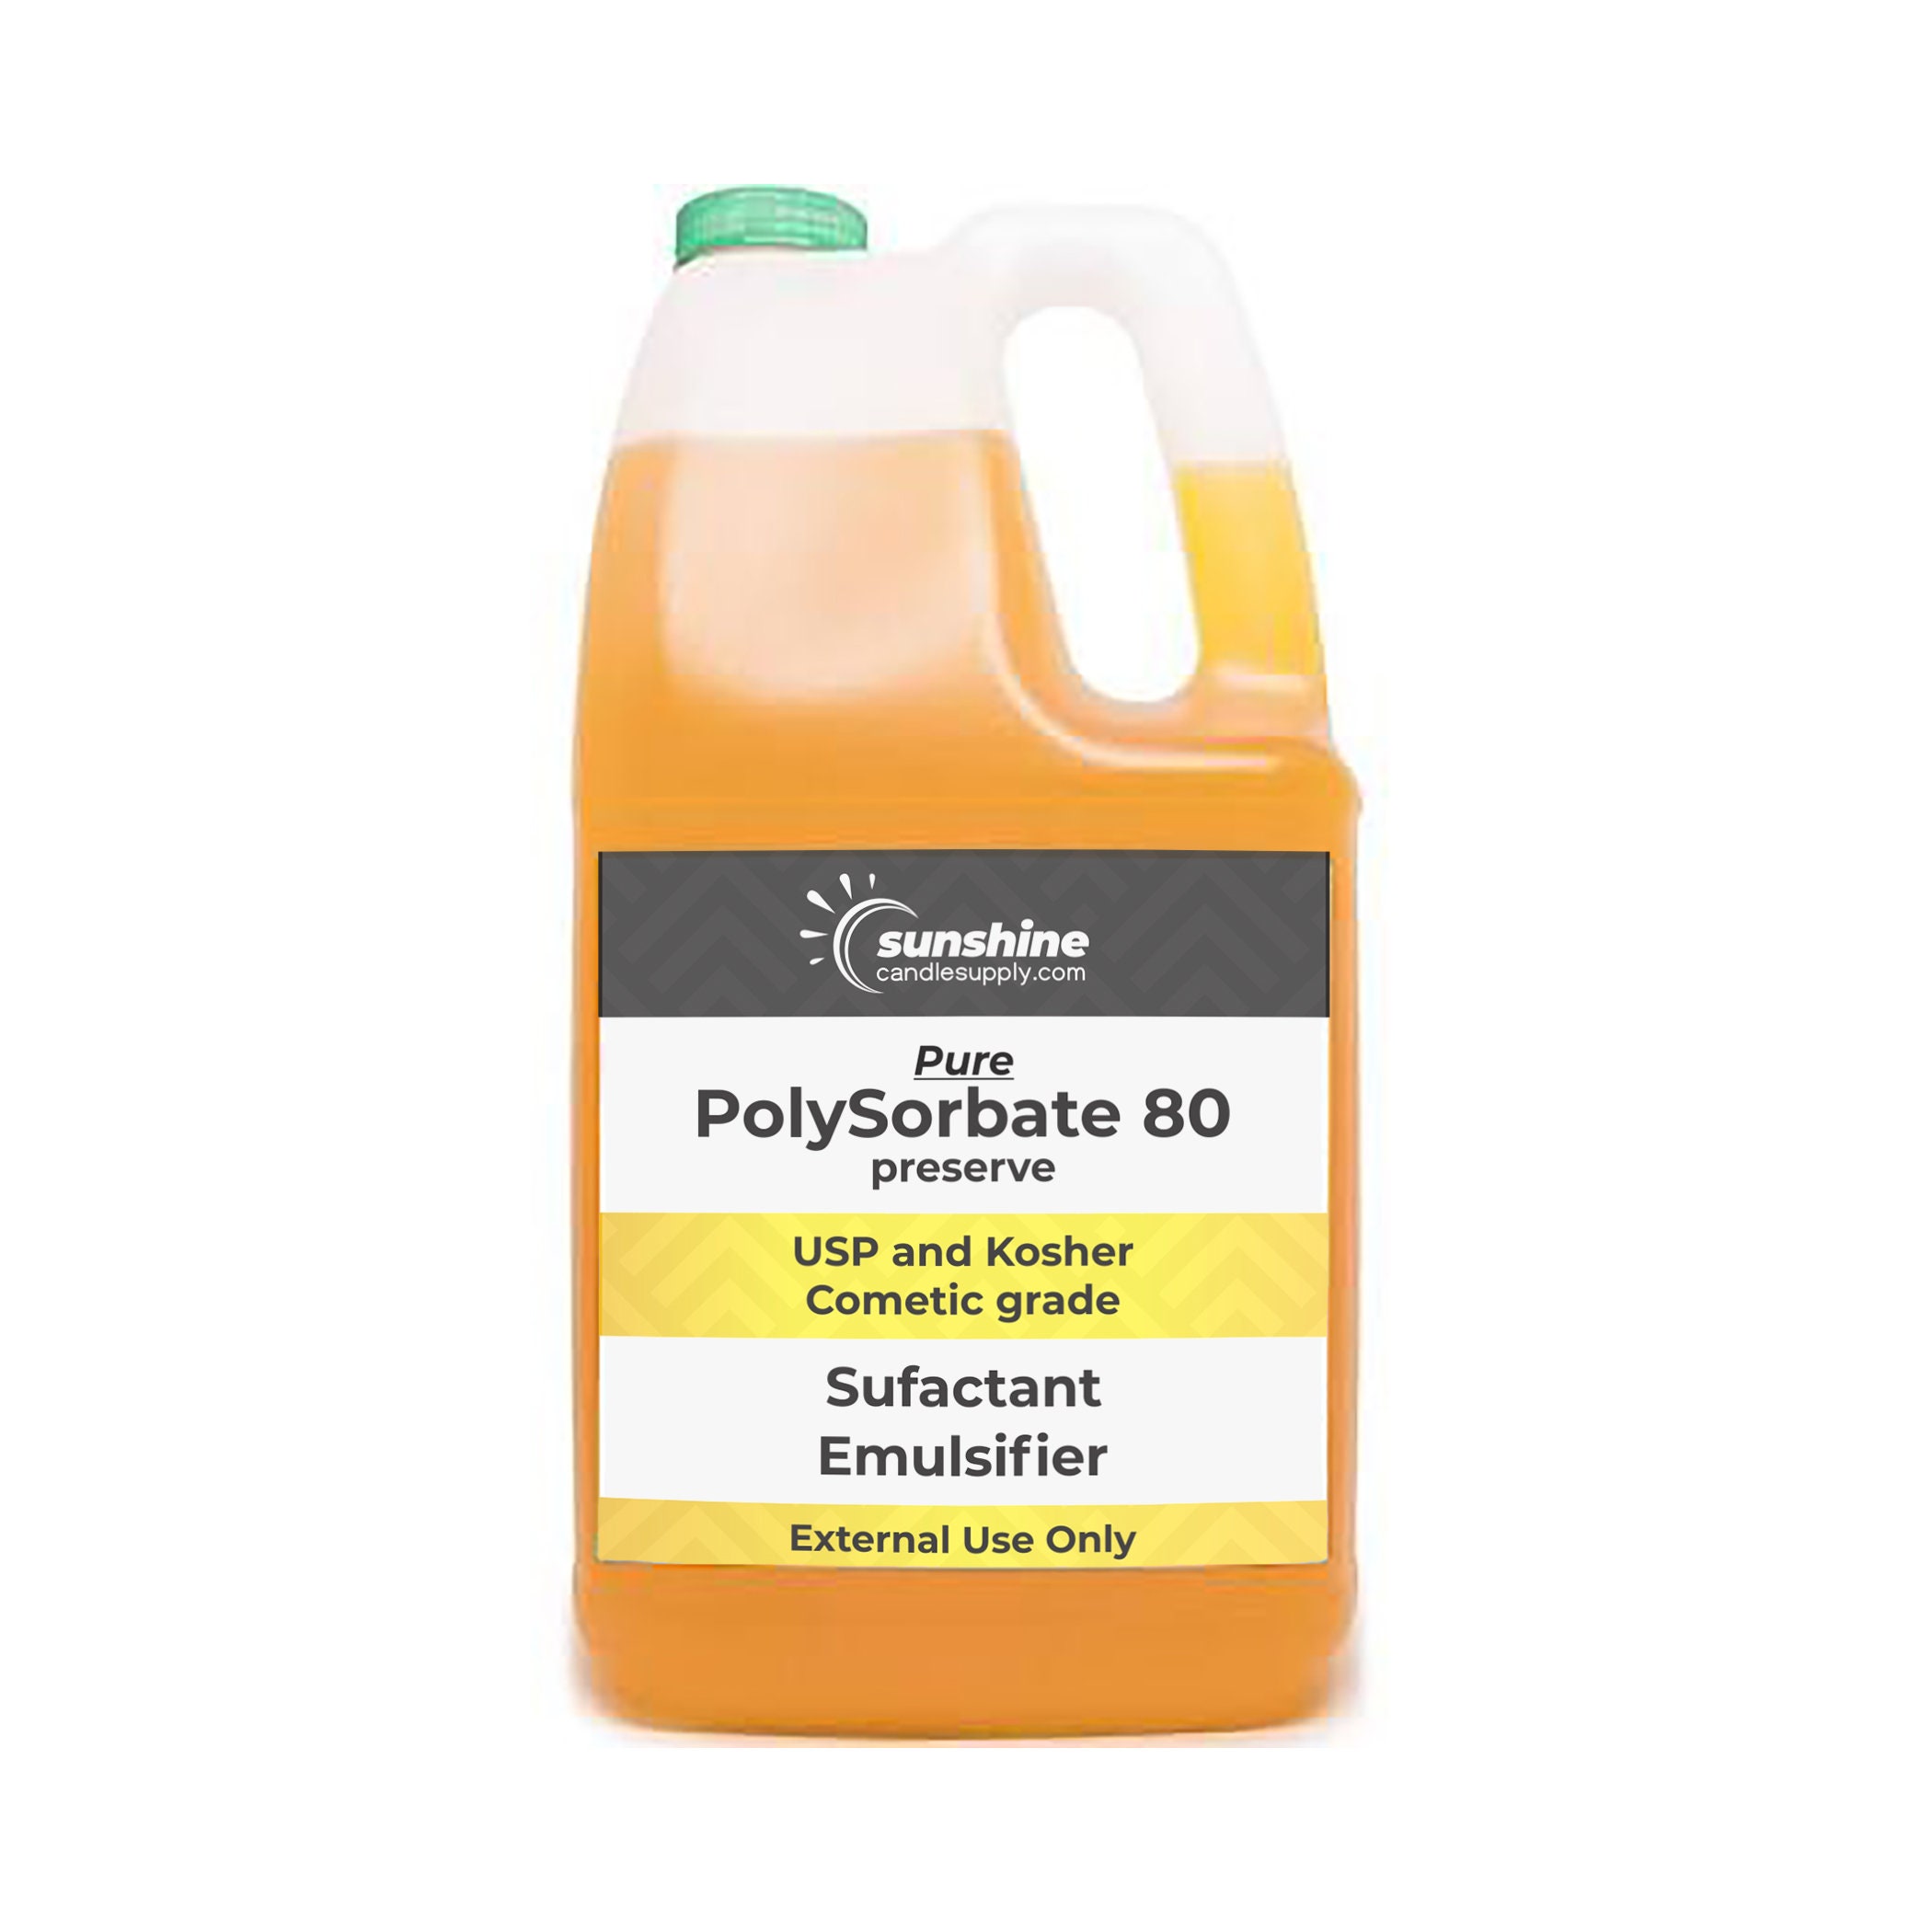 Polysorbate 80 Preservative tween 80, T-max 80 100% Pure Natural  Emulsifying Surfactant Soap Making Supplies Bulk Buttercrafters 